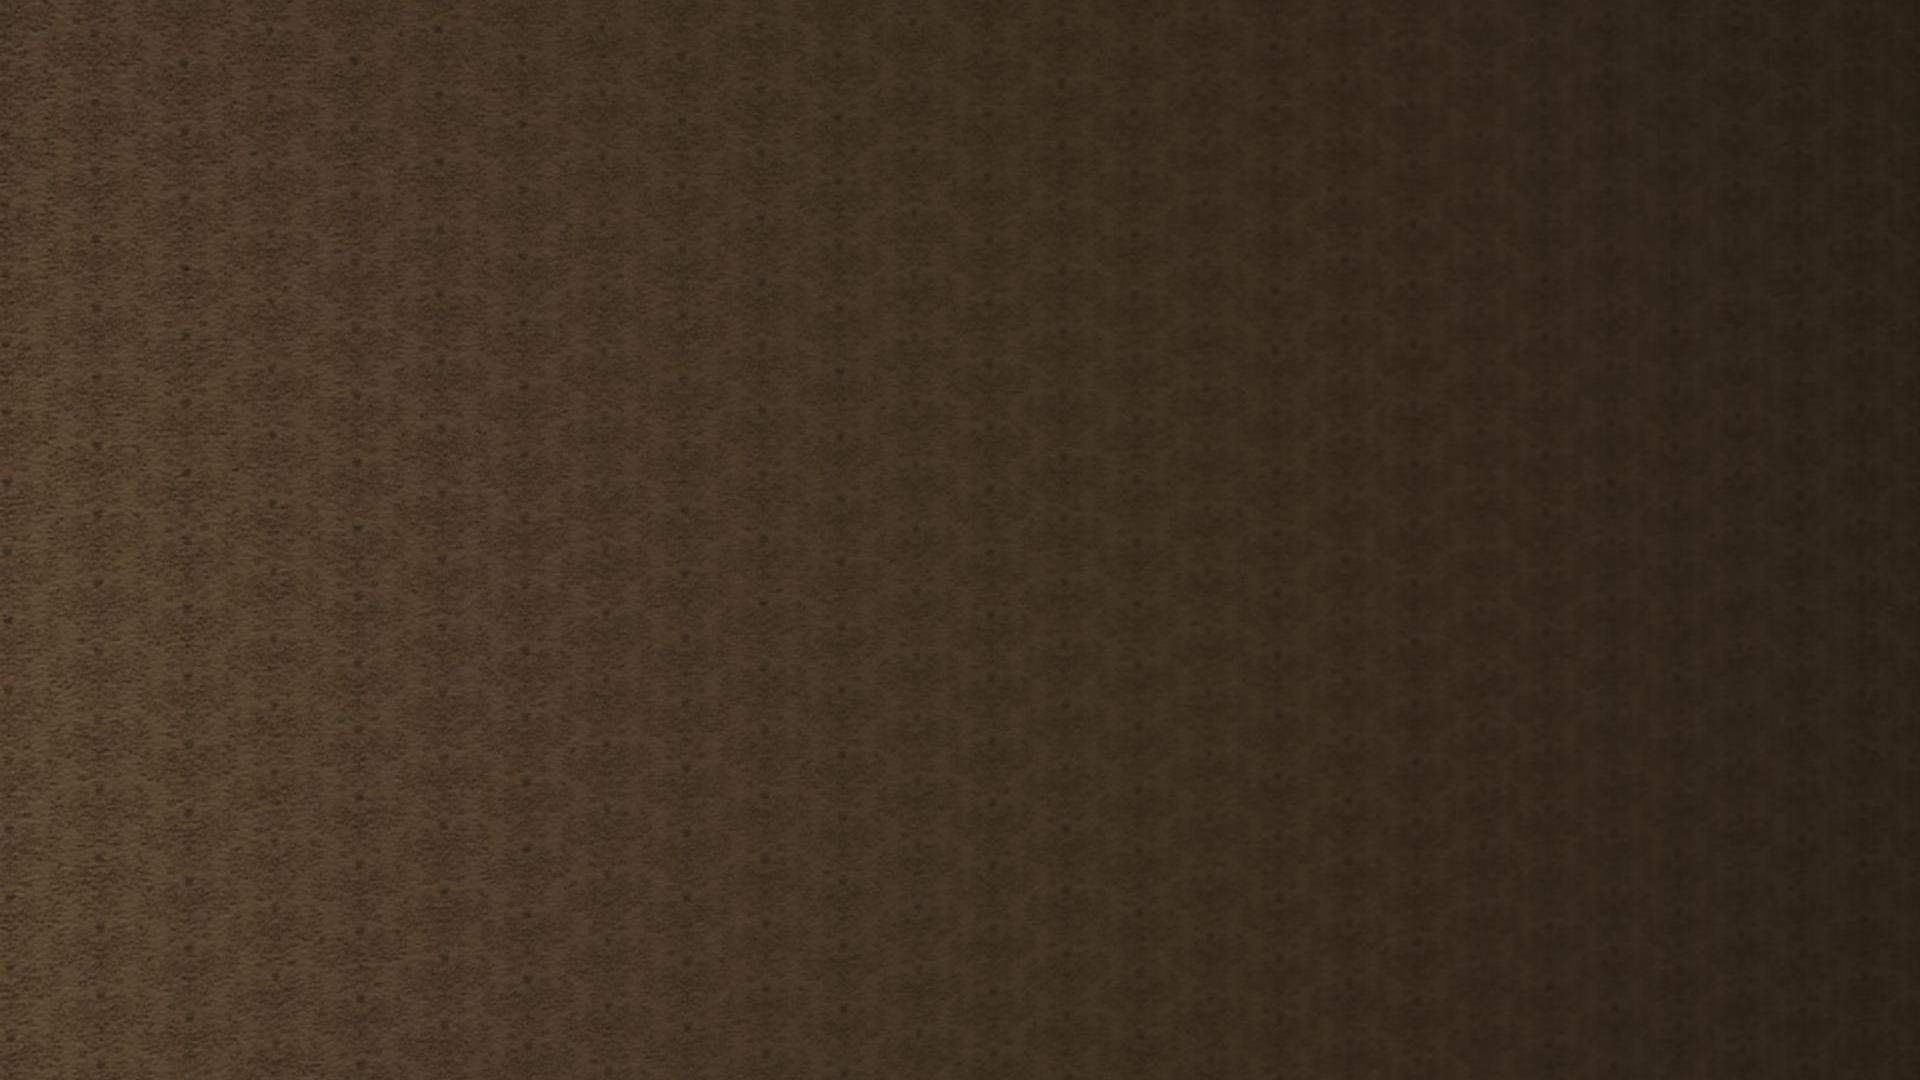 1920x1080 Brown Wall Paper 746423